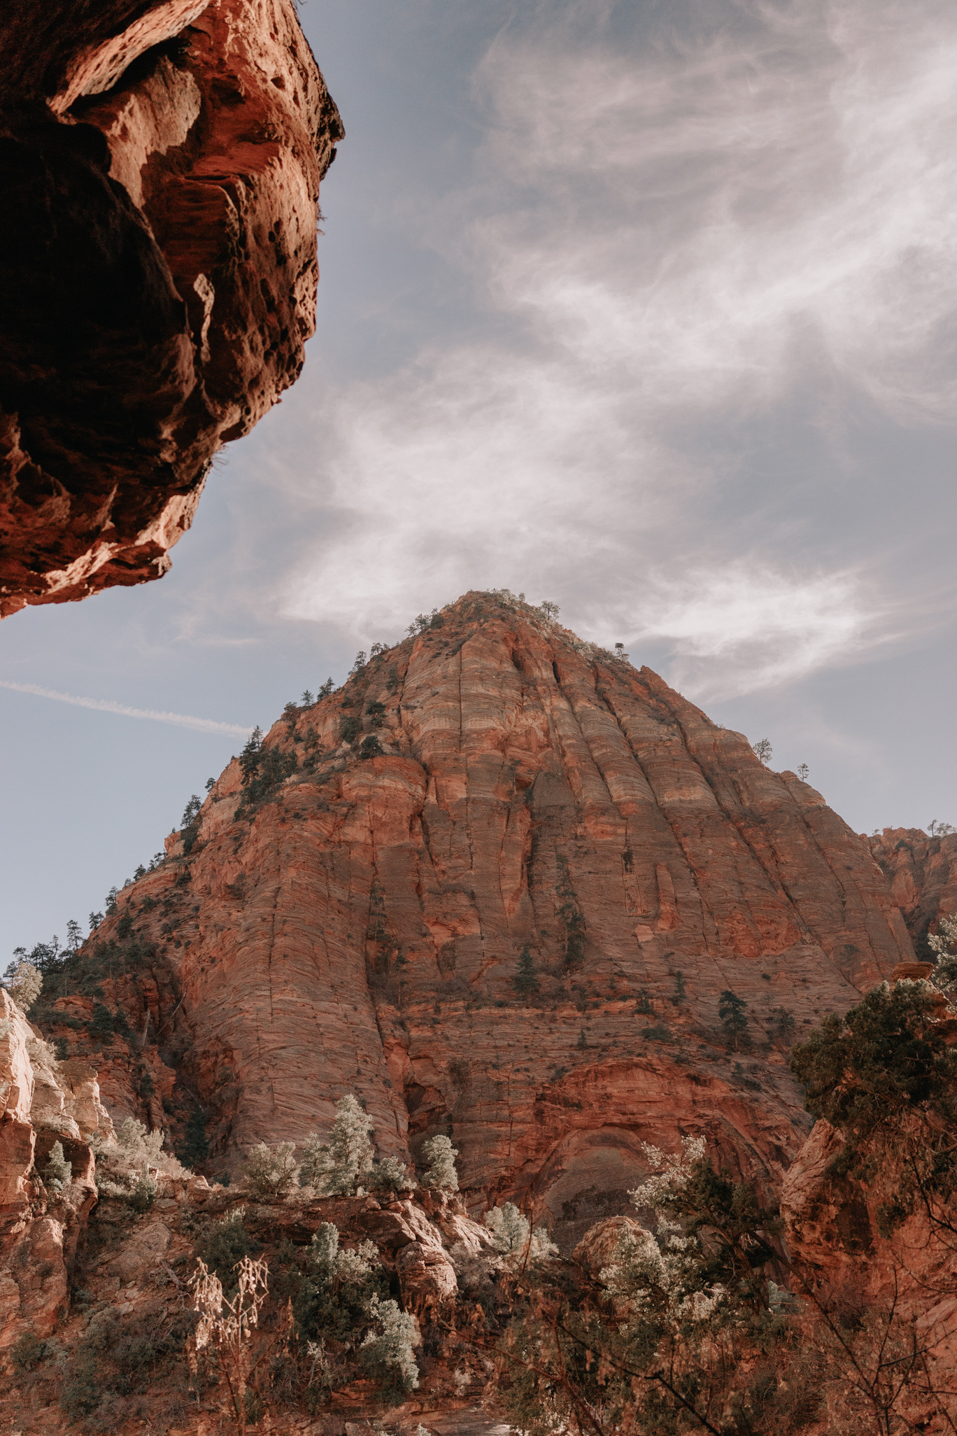 Zion National Park Overlook Trail - The ultimate 7-day Southwest road-trip #RoadTrip #USA - Day by day itinerary and the best parks to visit in Utah, Nevada, and Arizona